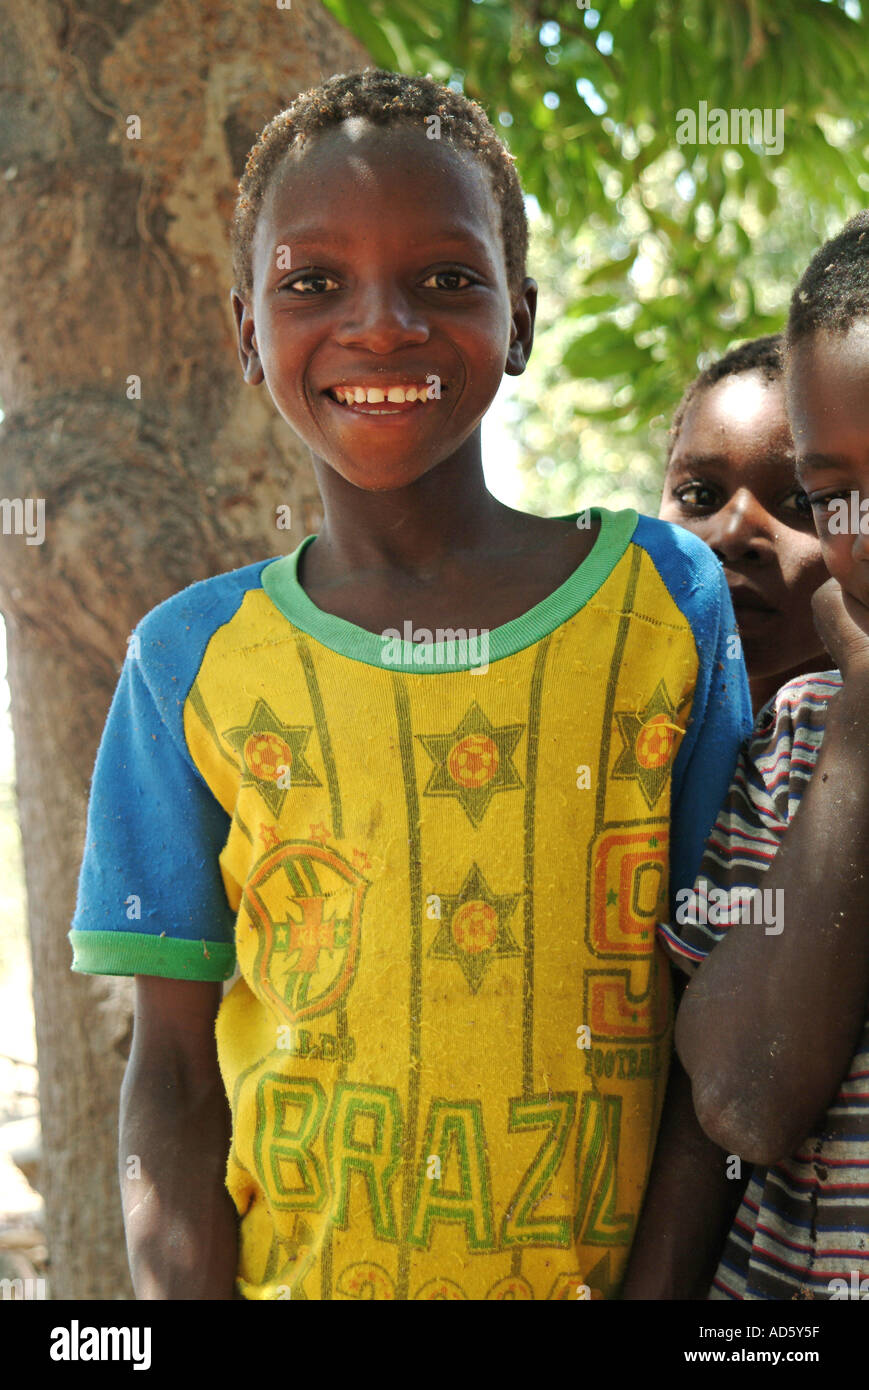 A young boy smiling in his Brazil T shirt. Likoma Island, Lake